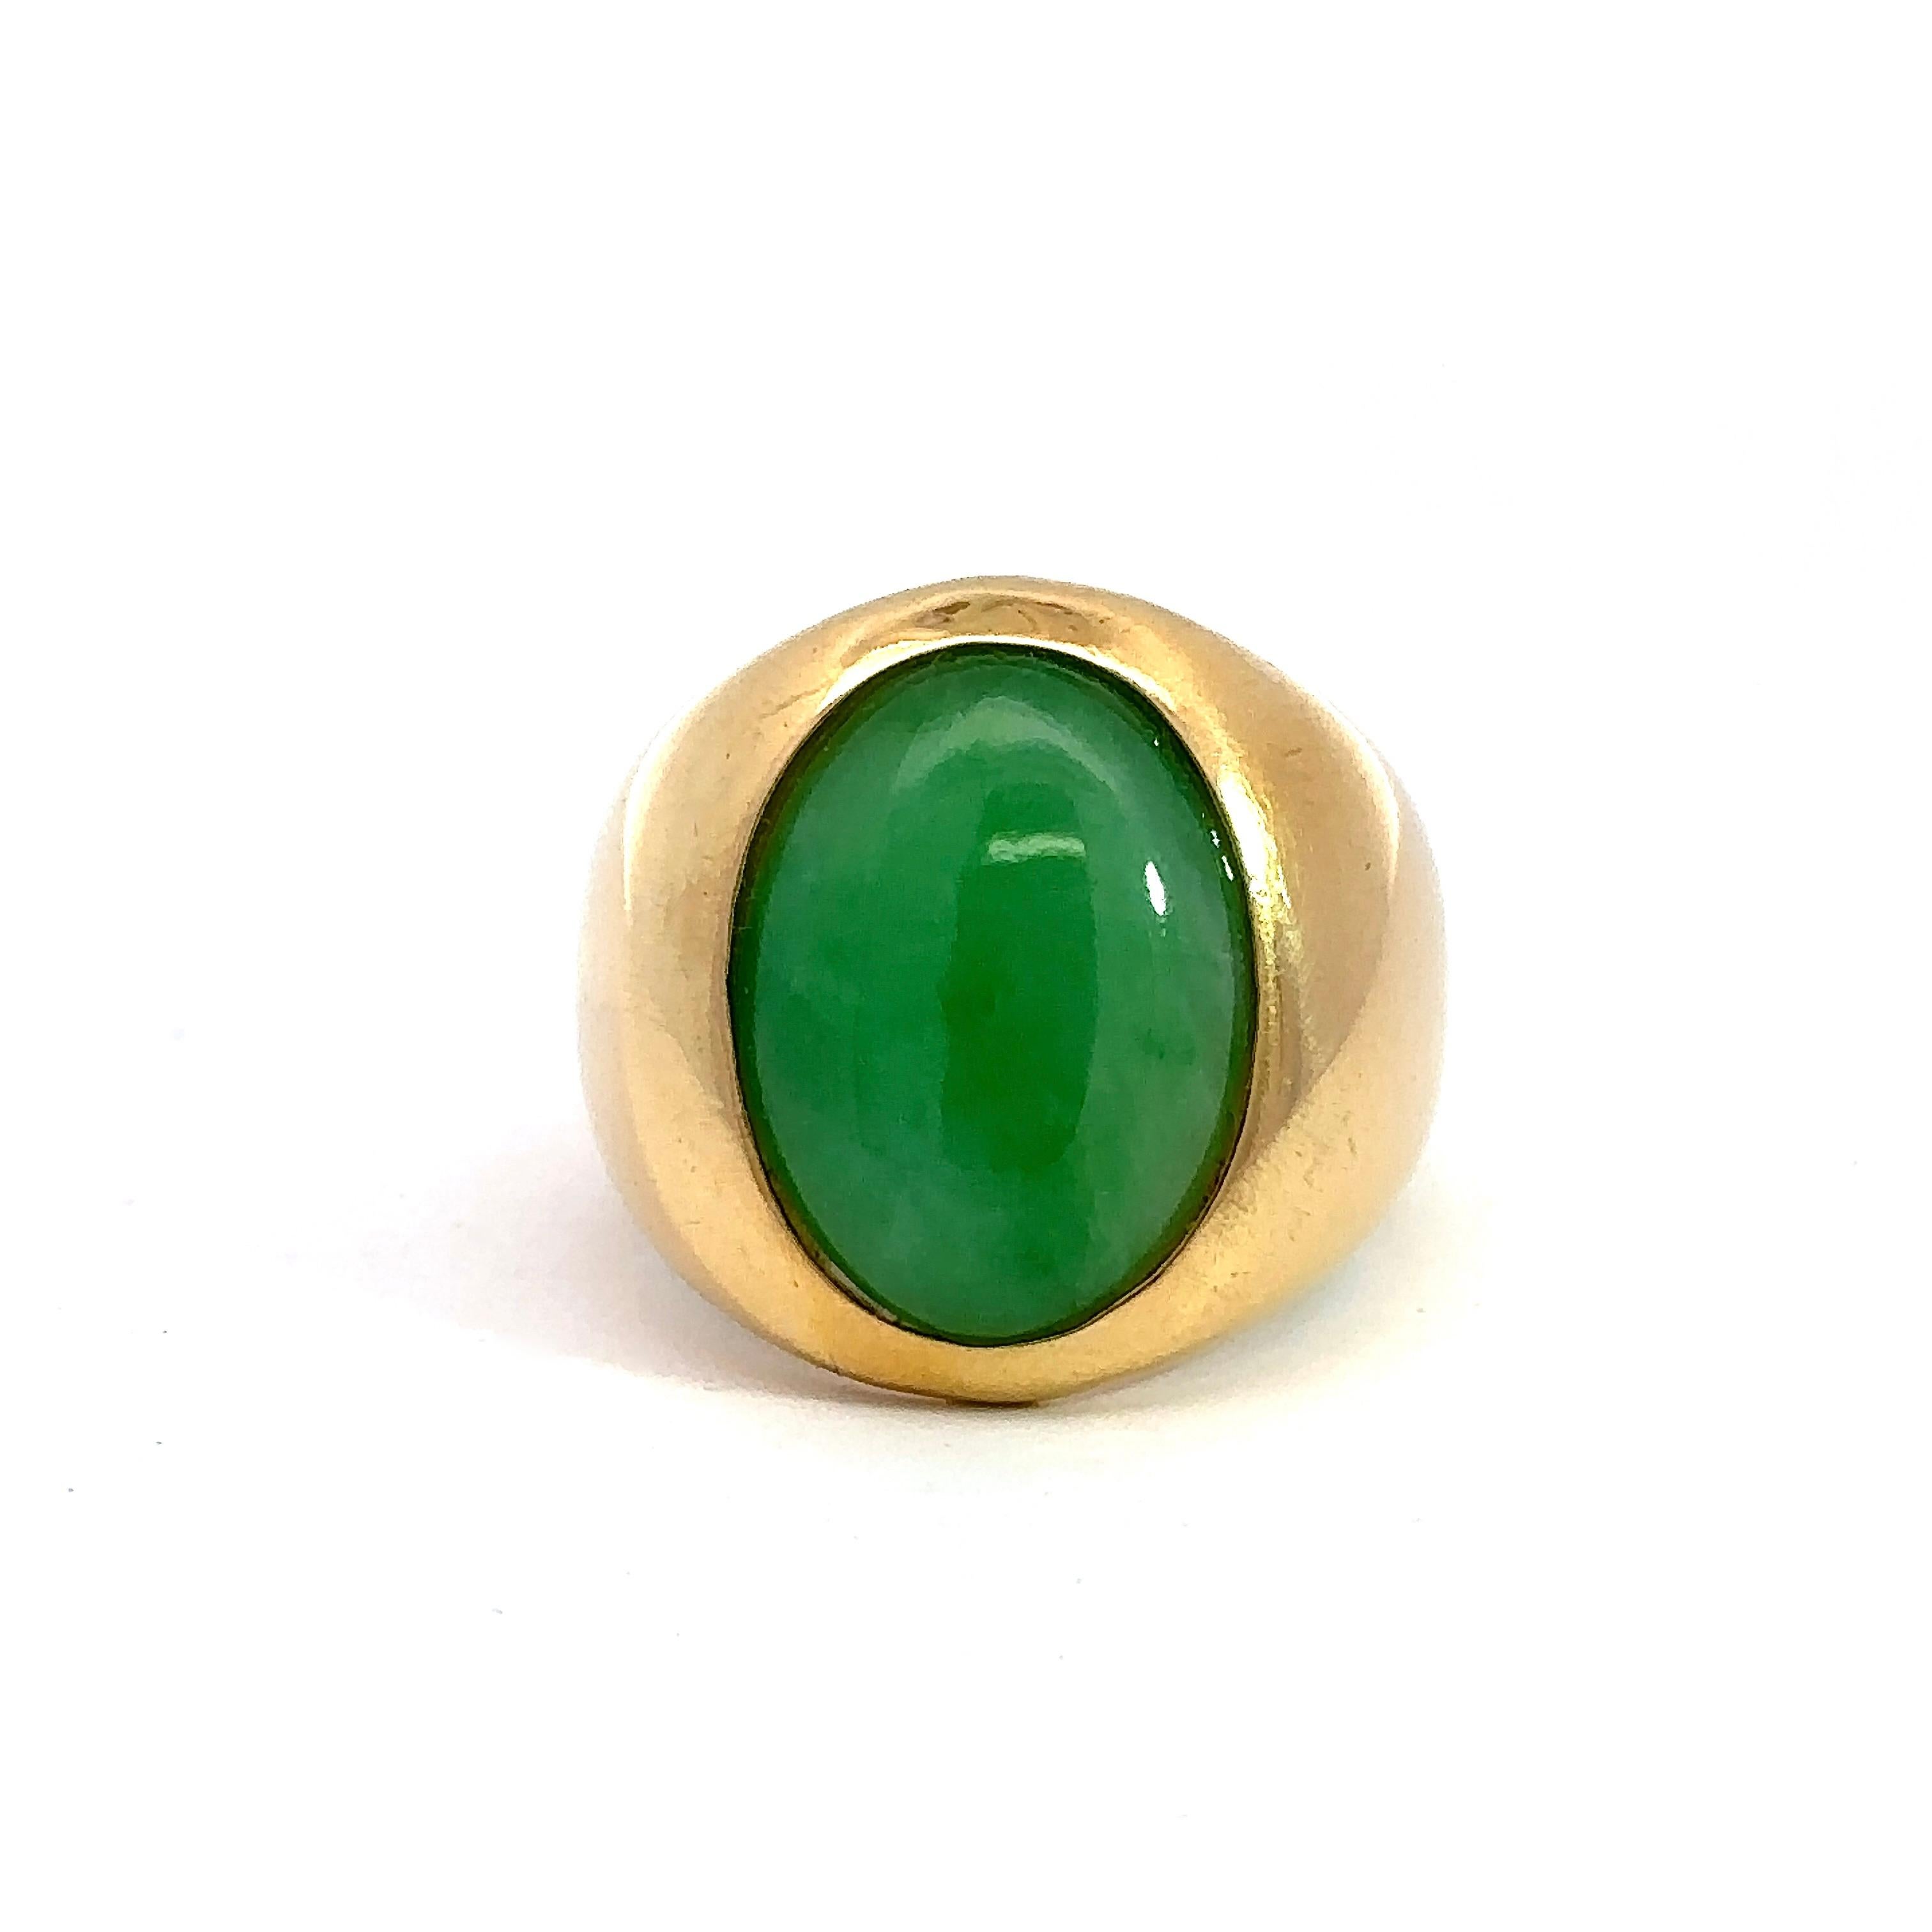 This estate oval cabochon jade signet ring is crafted in 18KT yellow gold and dates from the 1970’s. It features a striking bezel set oval green jade that measures approximately 16mm x 12mm and the shank tapers to 6mm. The ring is size 6.5 and can